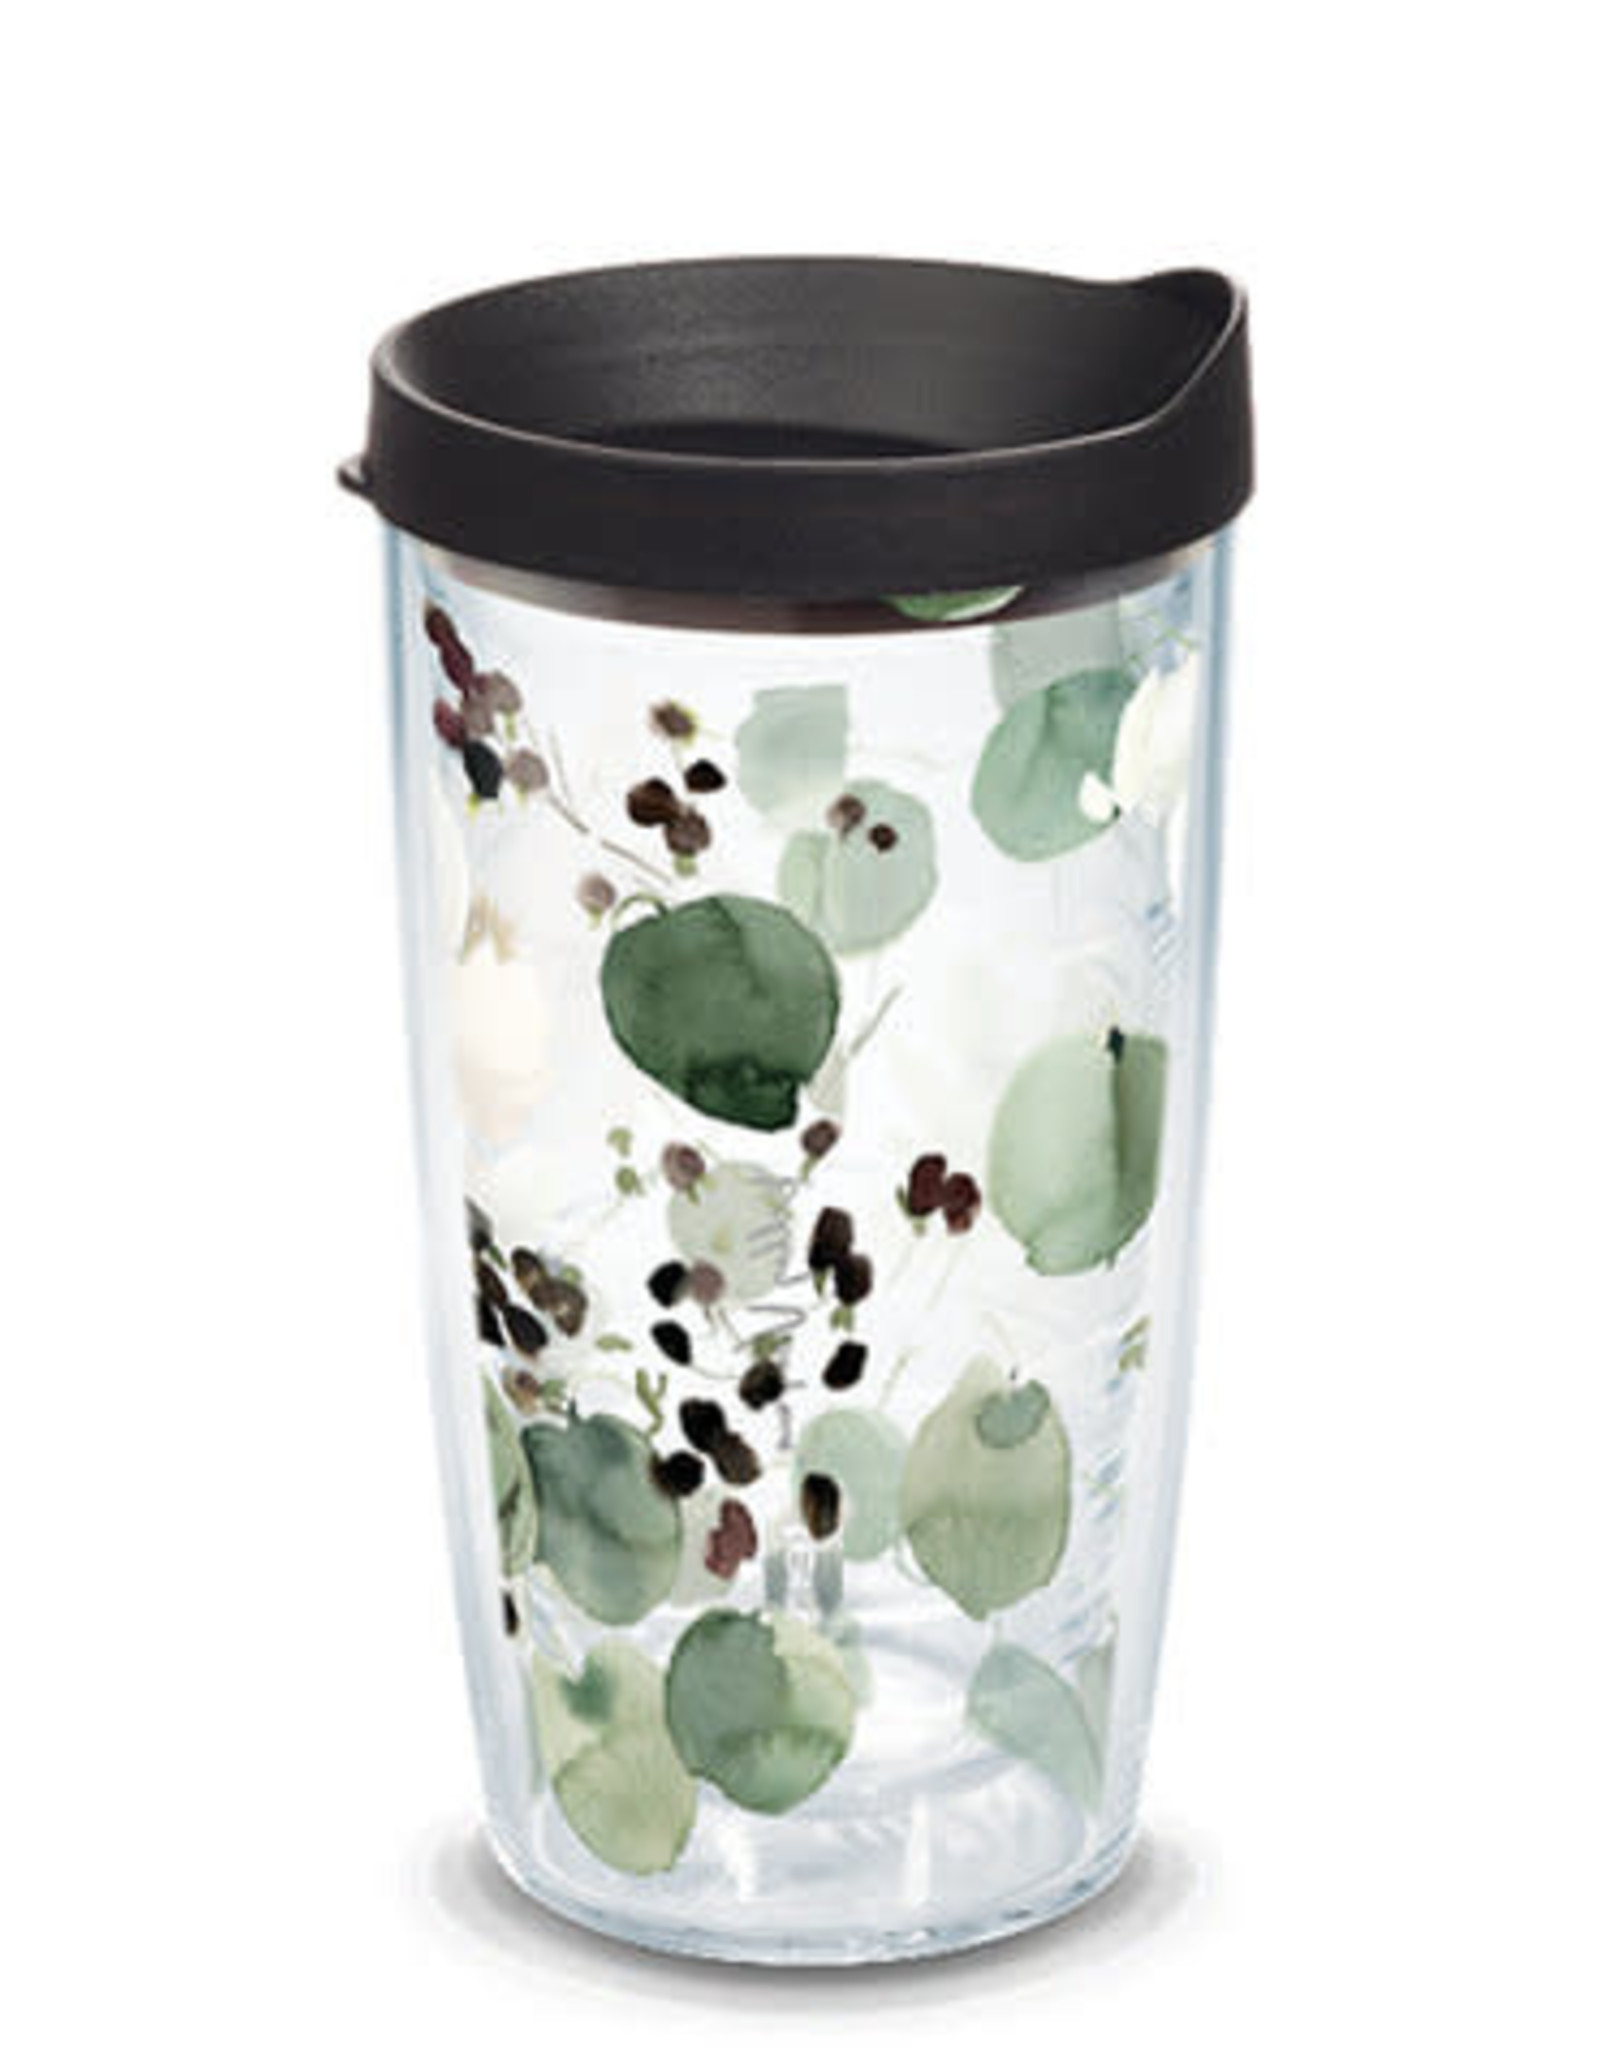 24oz Water Bottle Tervis Made in USA Double Walled Kelly Ventura Insulated Tumbler Cup Keeps Drinks Cold & Hot Eucalyptus 